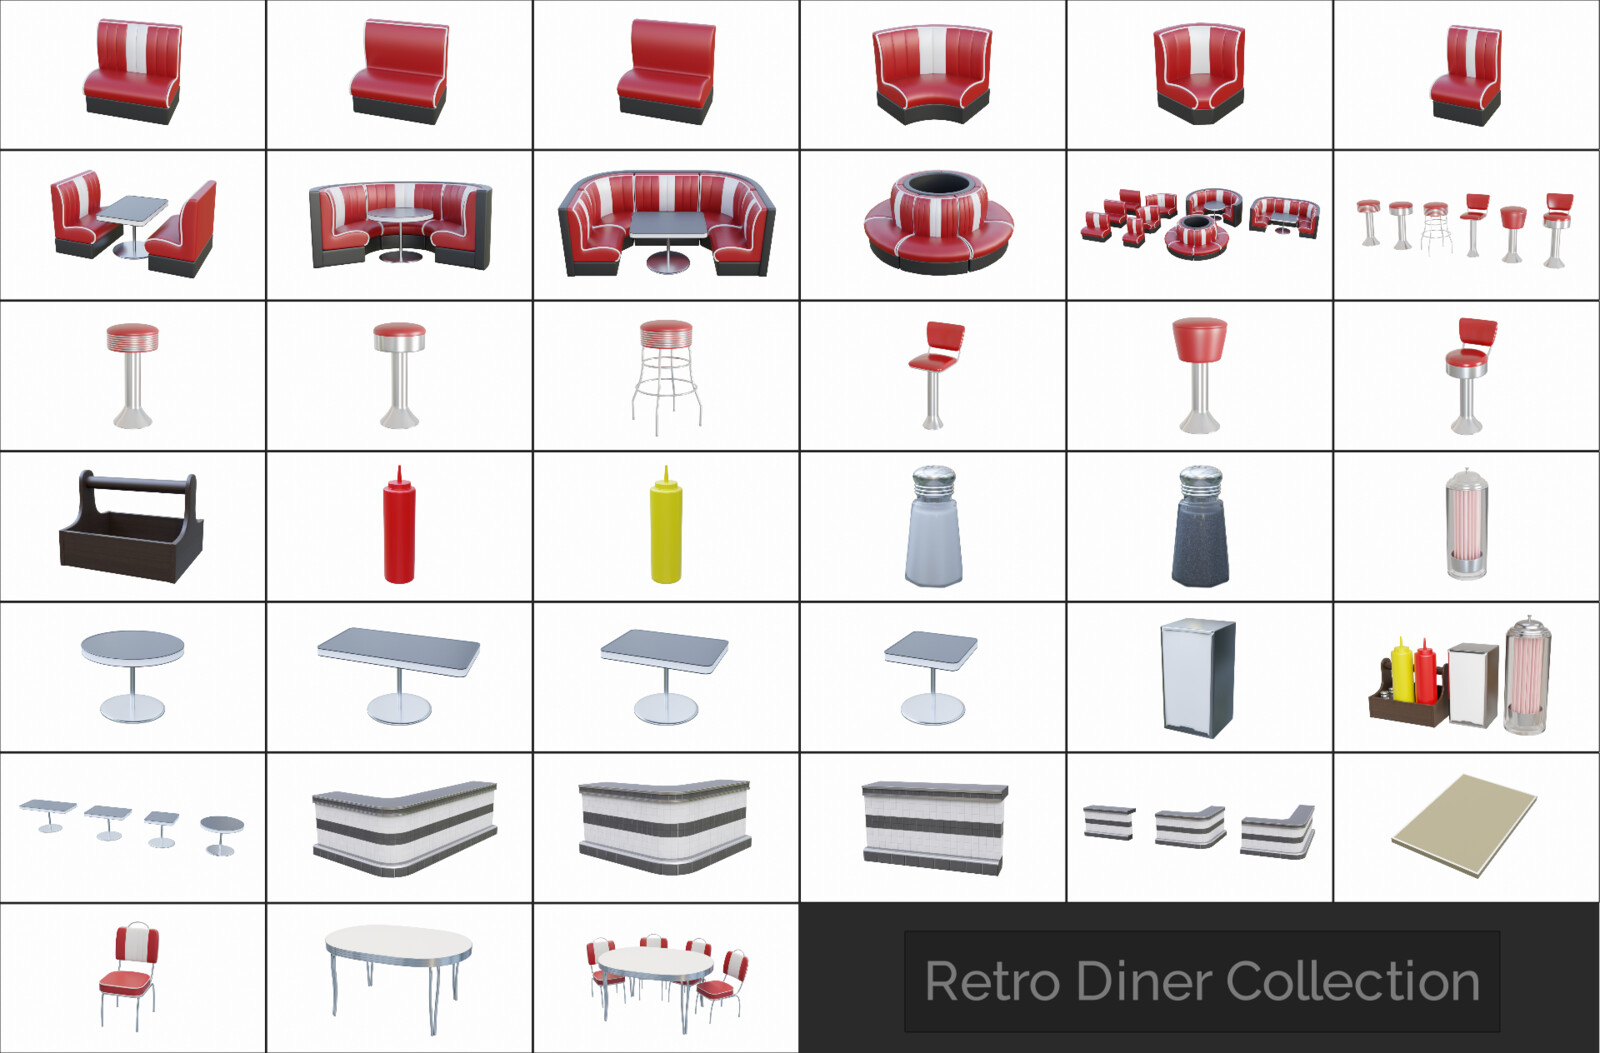 Complete Diner Collection Collage